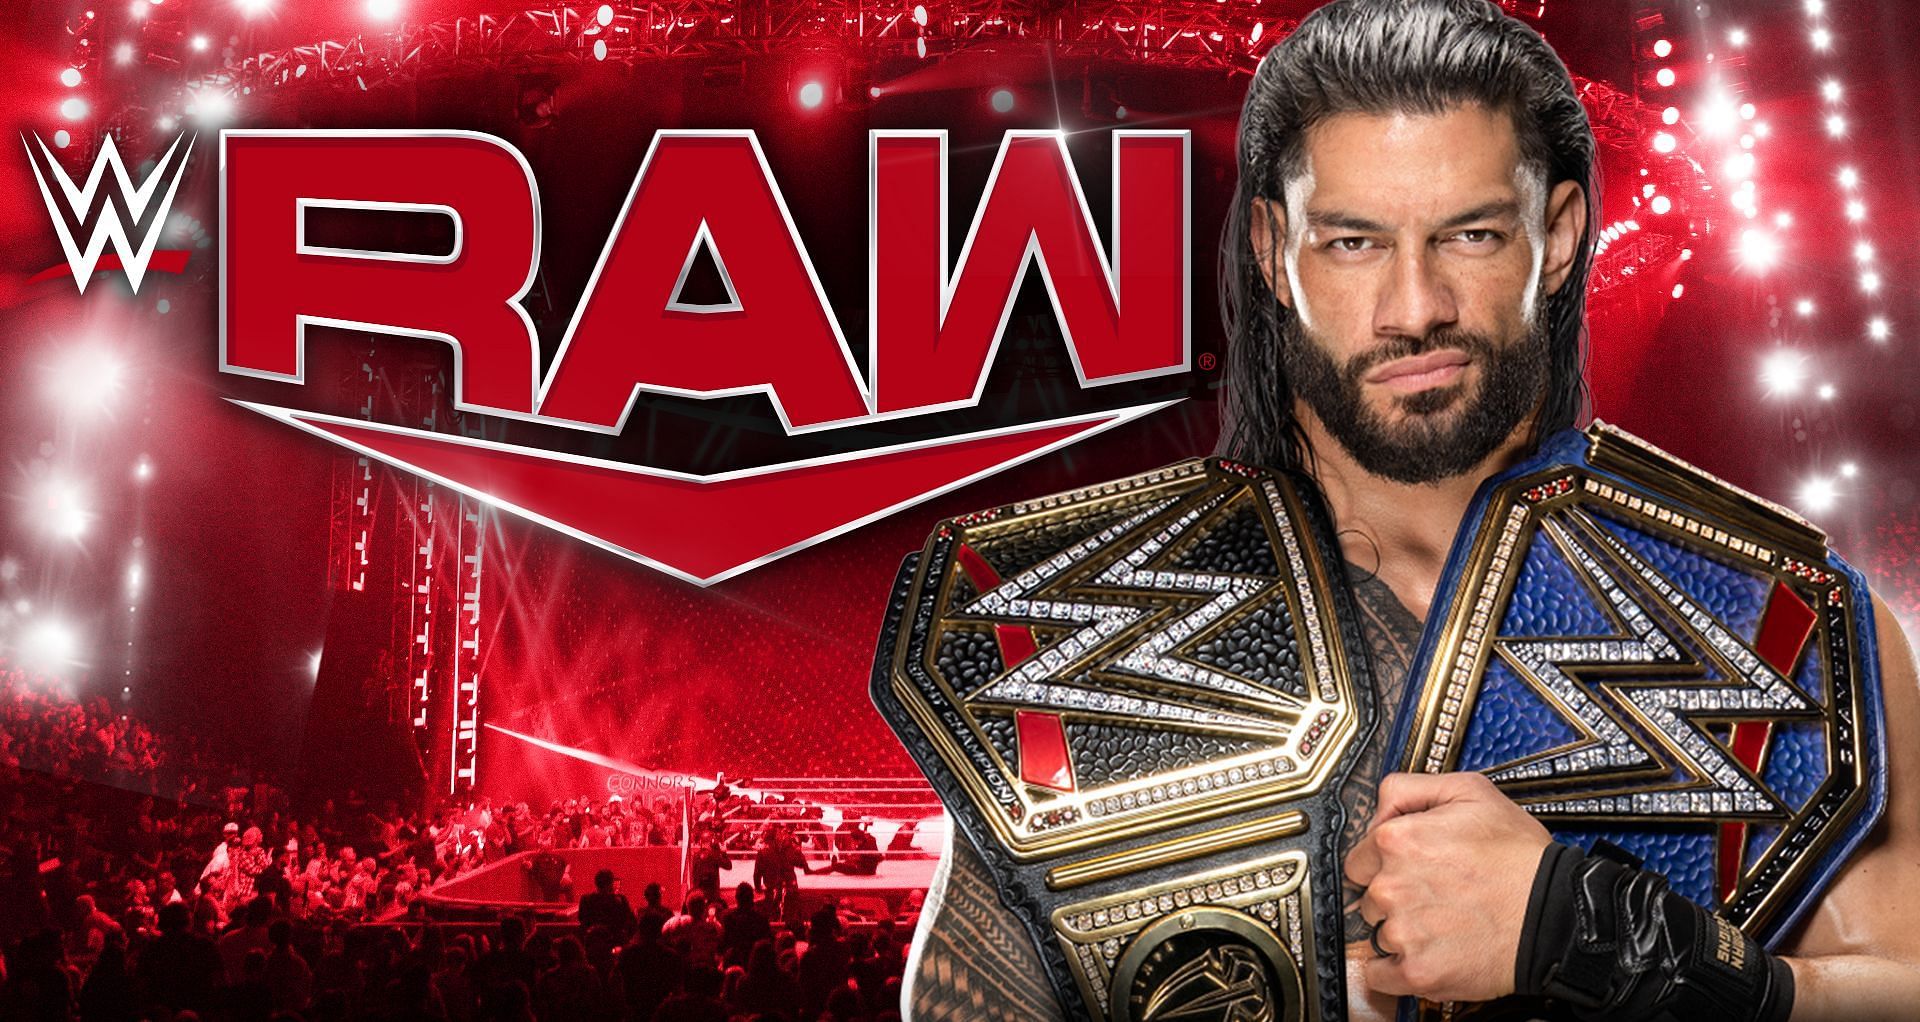 Roman Reigns is advertised for a future RAW show